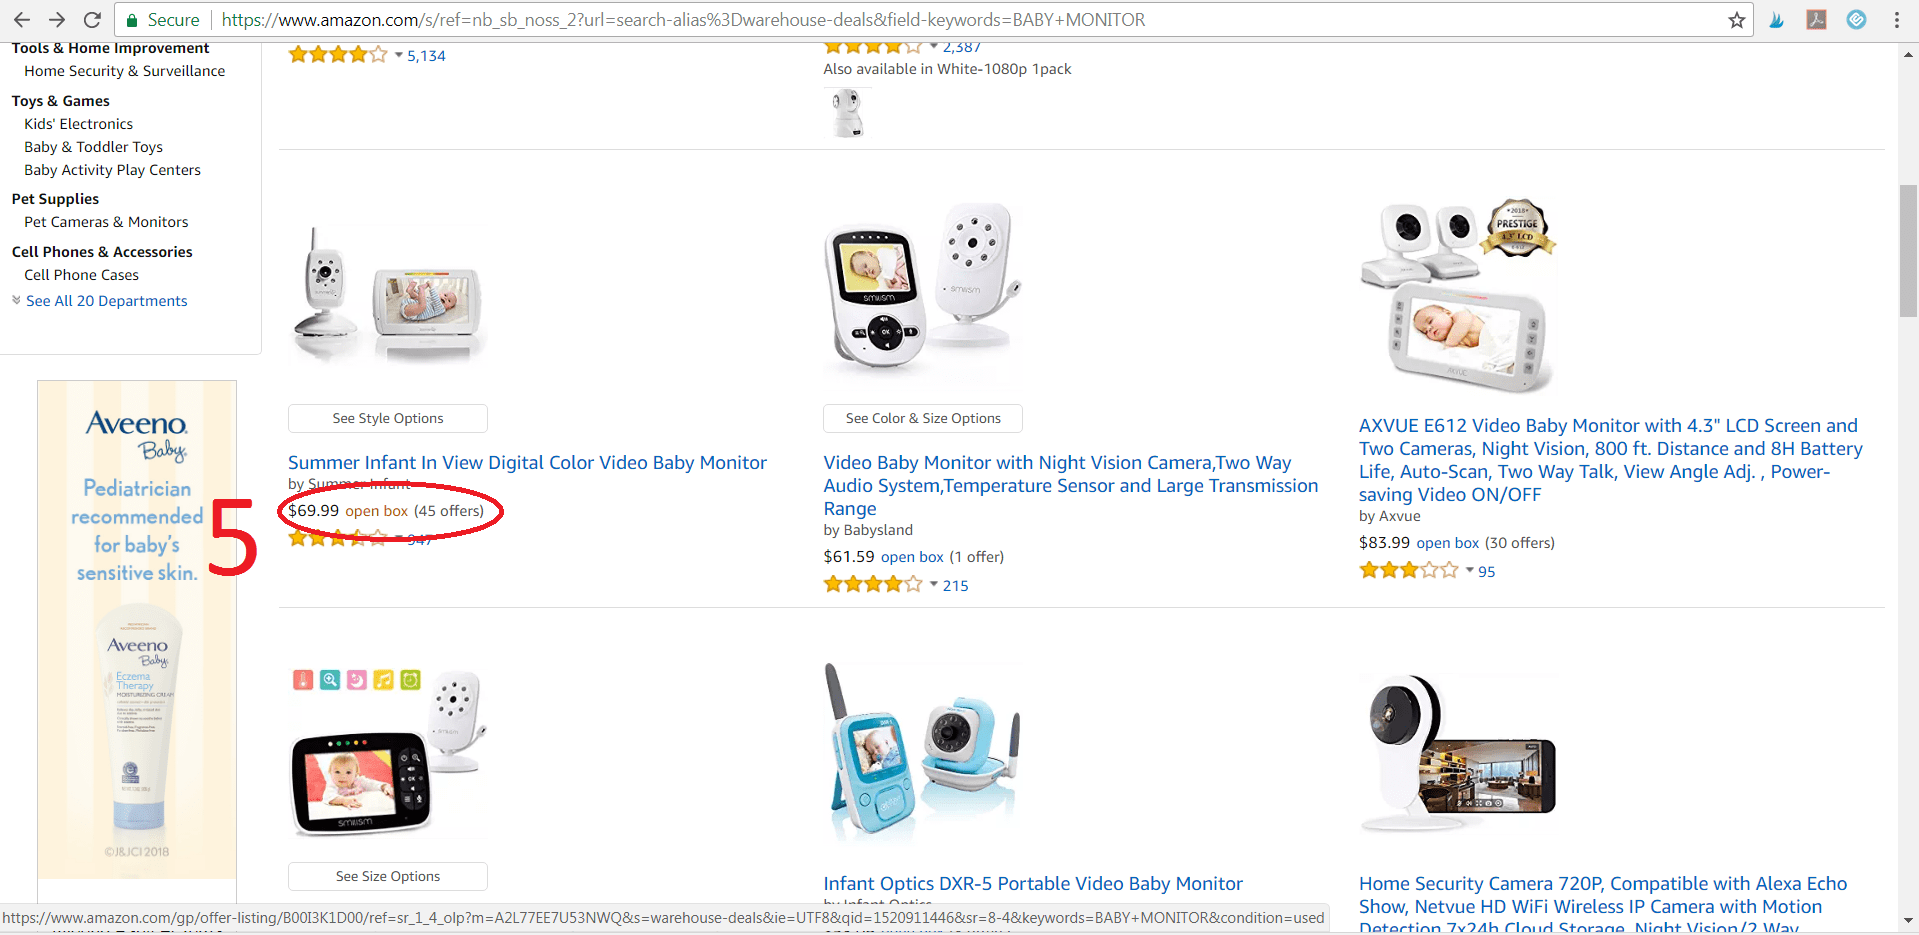 how to find open box deal in amazon warehouse